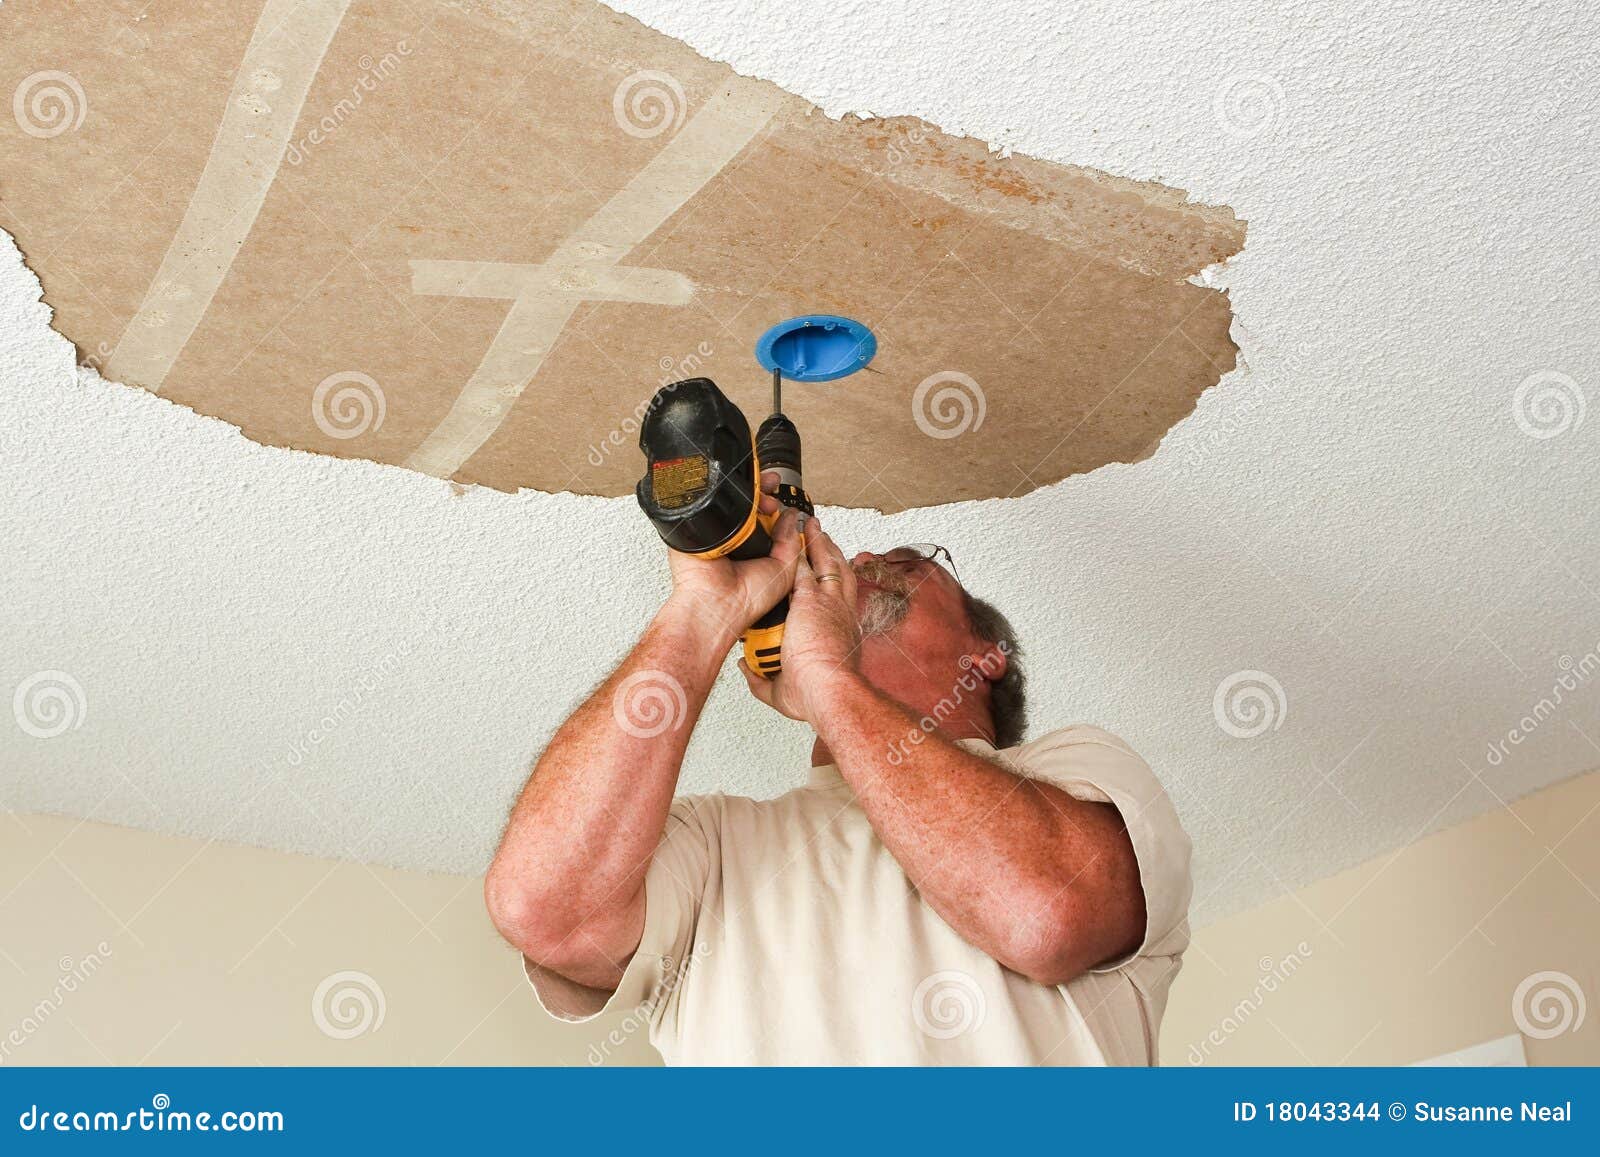 Electrician Installing Light Fixture On Ceiling Stock Images - Image